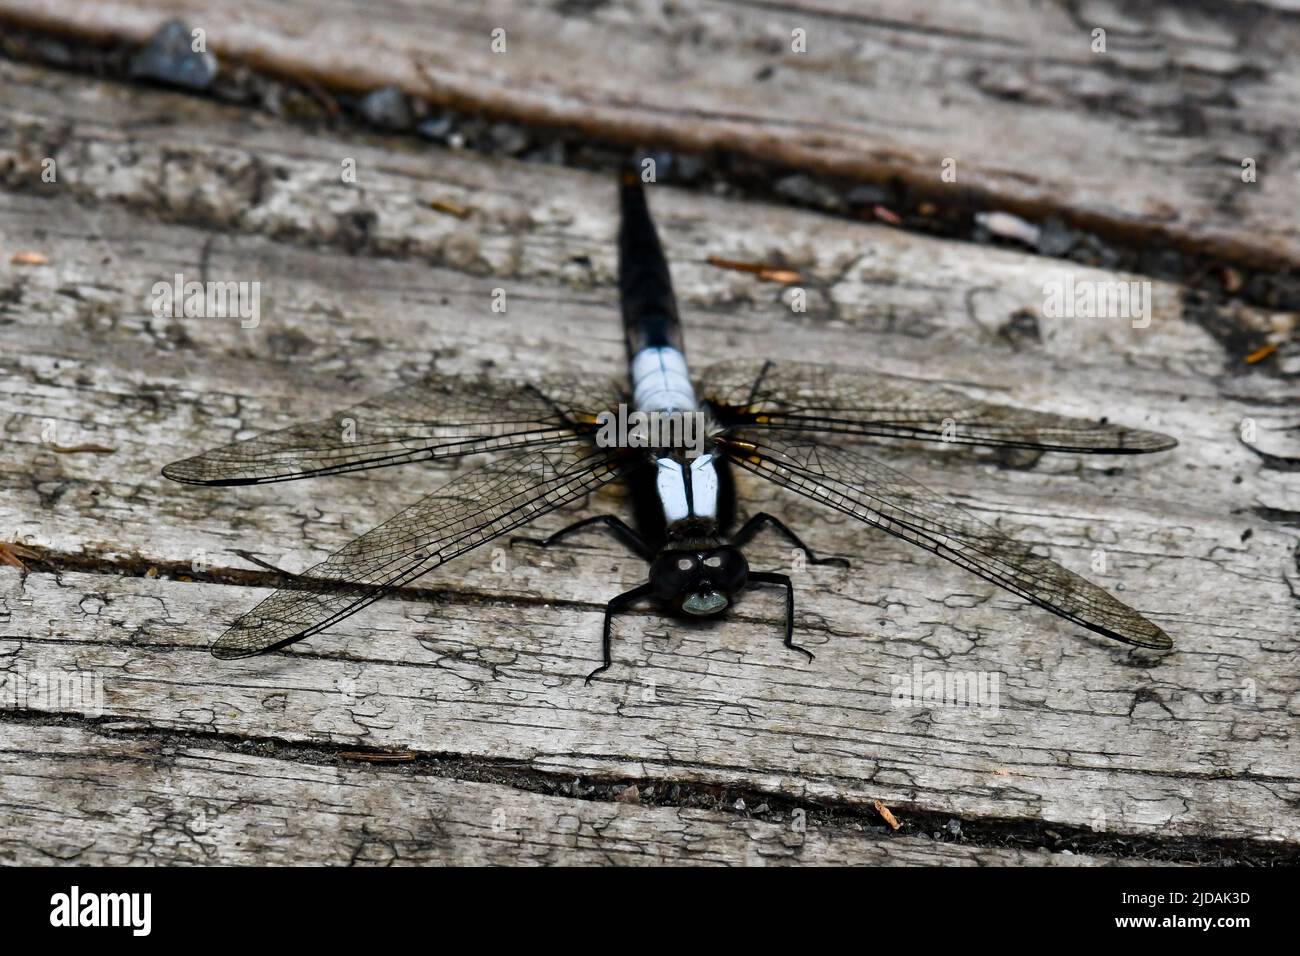 A Great Blue Skimmer dragonfly, Libellula vibrans, resting on an old wooden dock on a pond in the Adirondack Mountains, NY USA Stock Photo